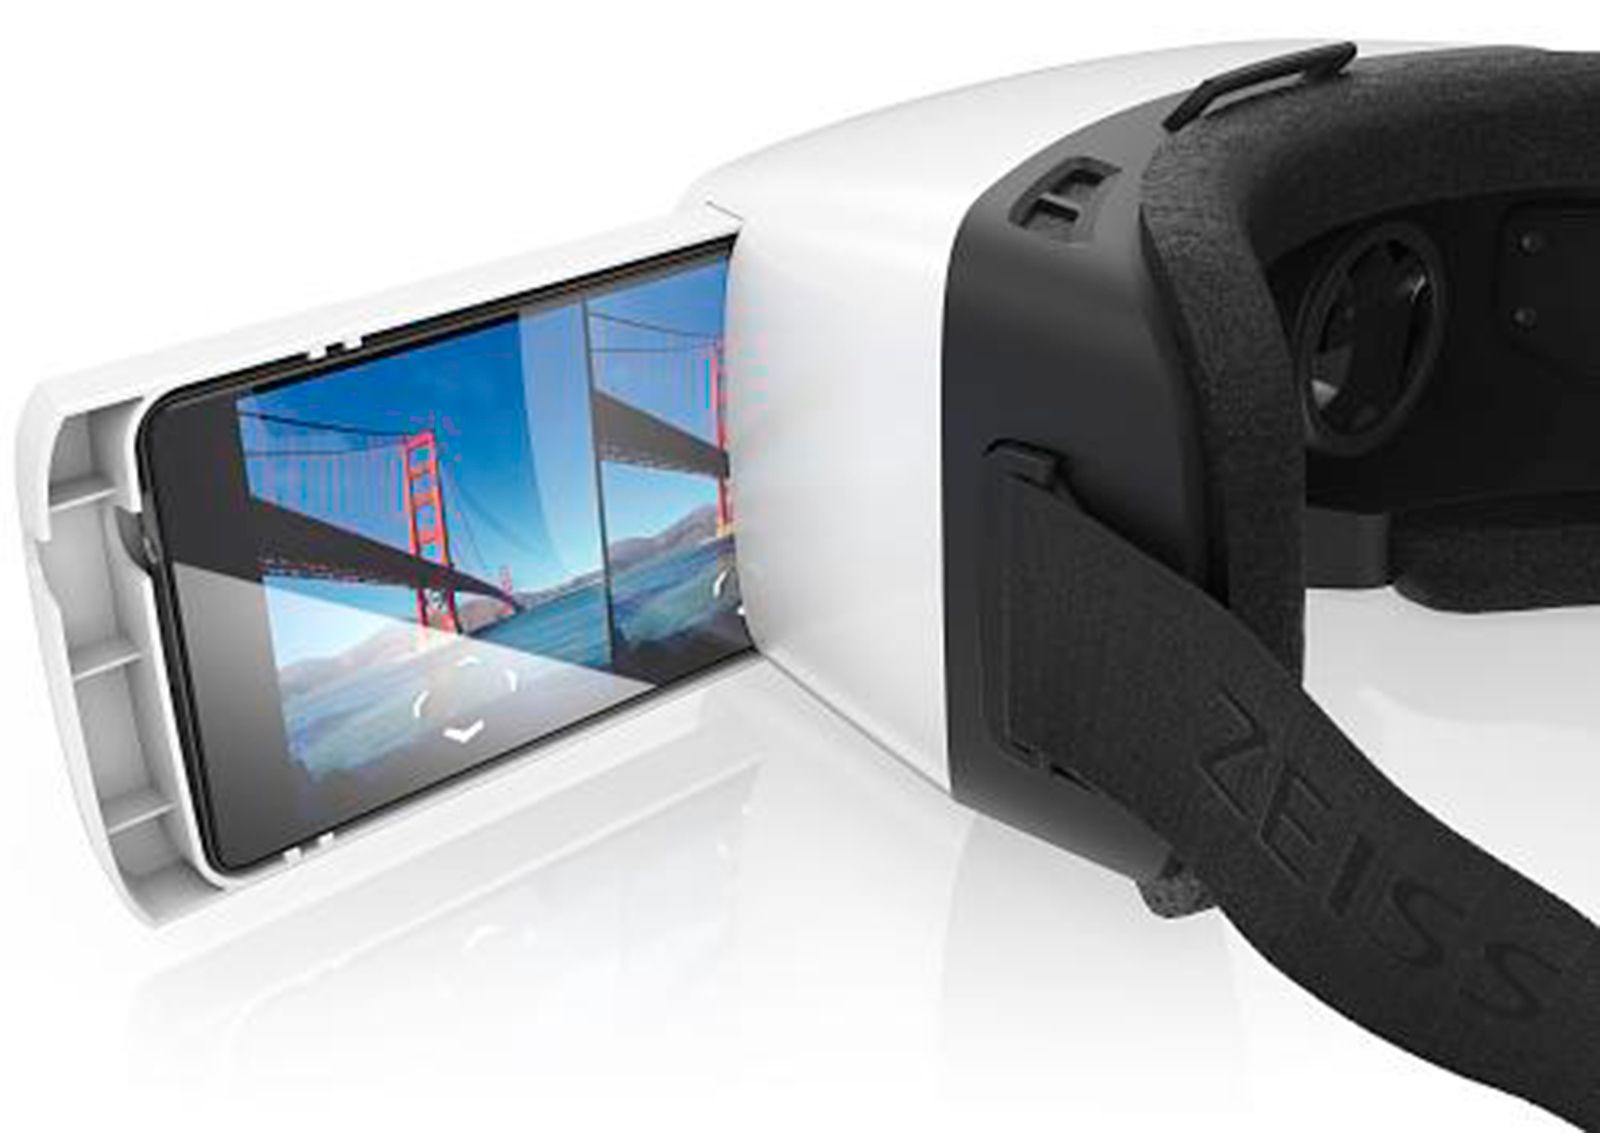 zeiss vr one headset works with both iphone and android image 1